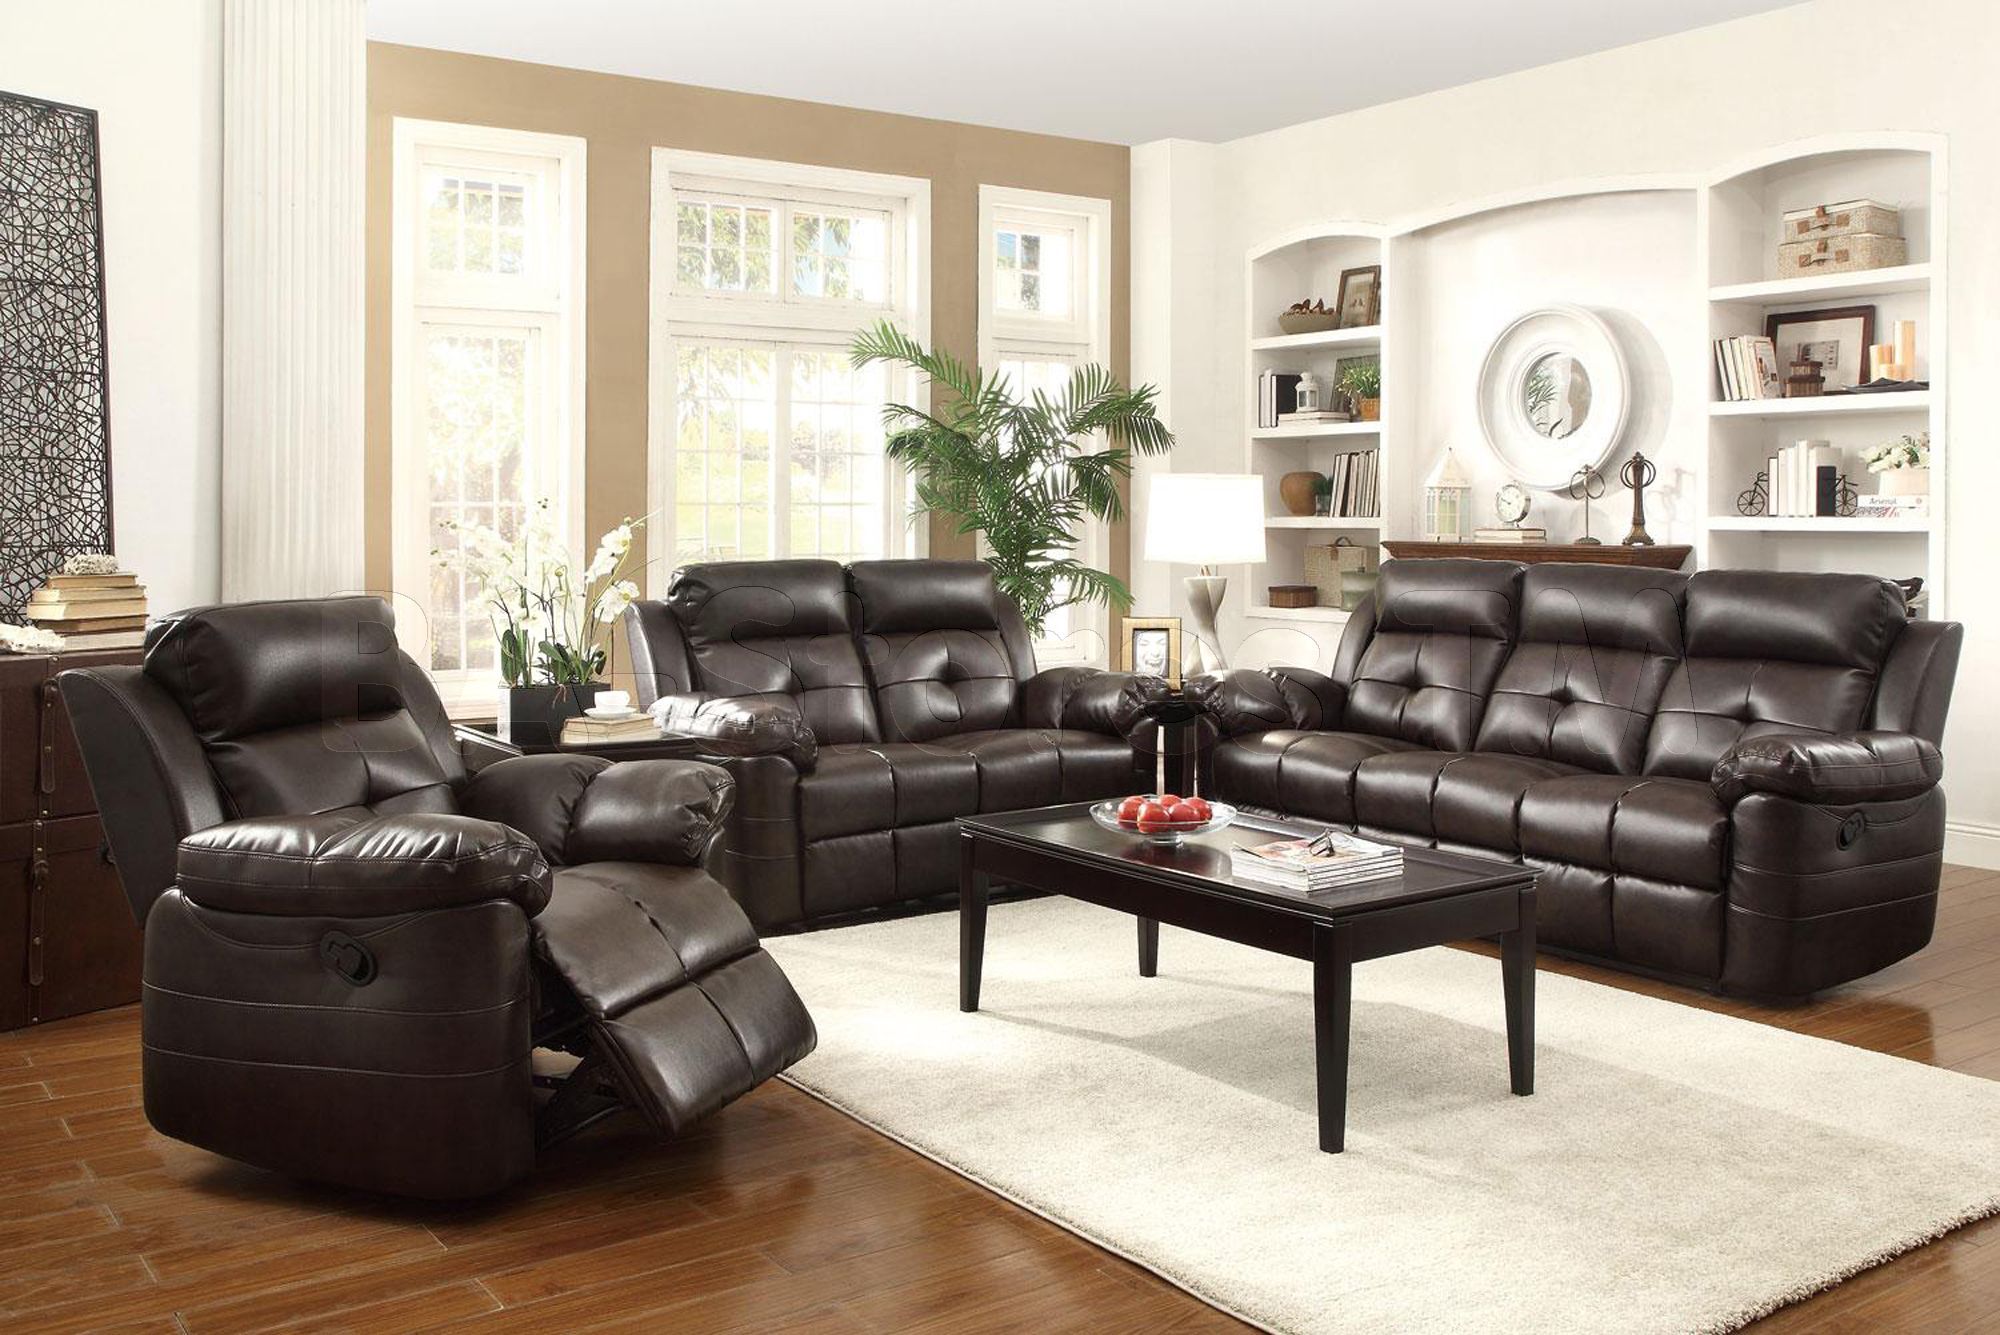 Keating Dark Brown Bonded Leather Match 3 Pc Motion Sofa Inside 3pc Bonded Leather Upholstered Wooden Sectional Sofas Brown (View 15 of 15)